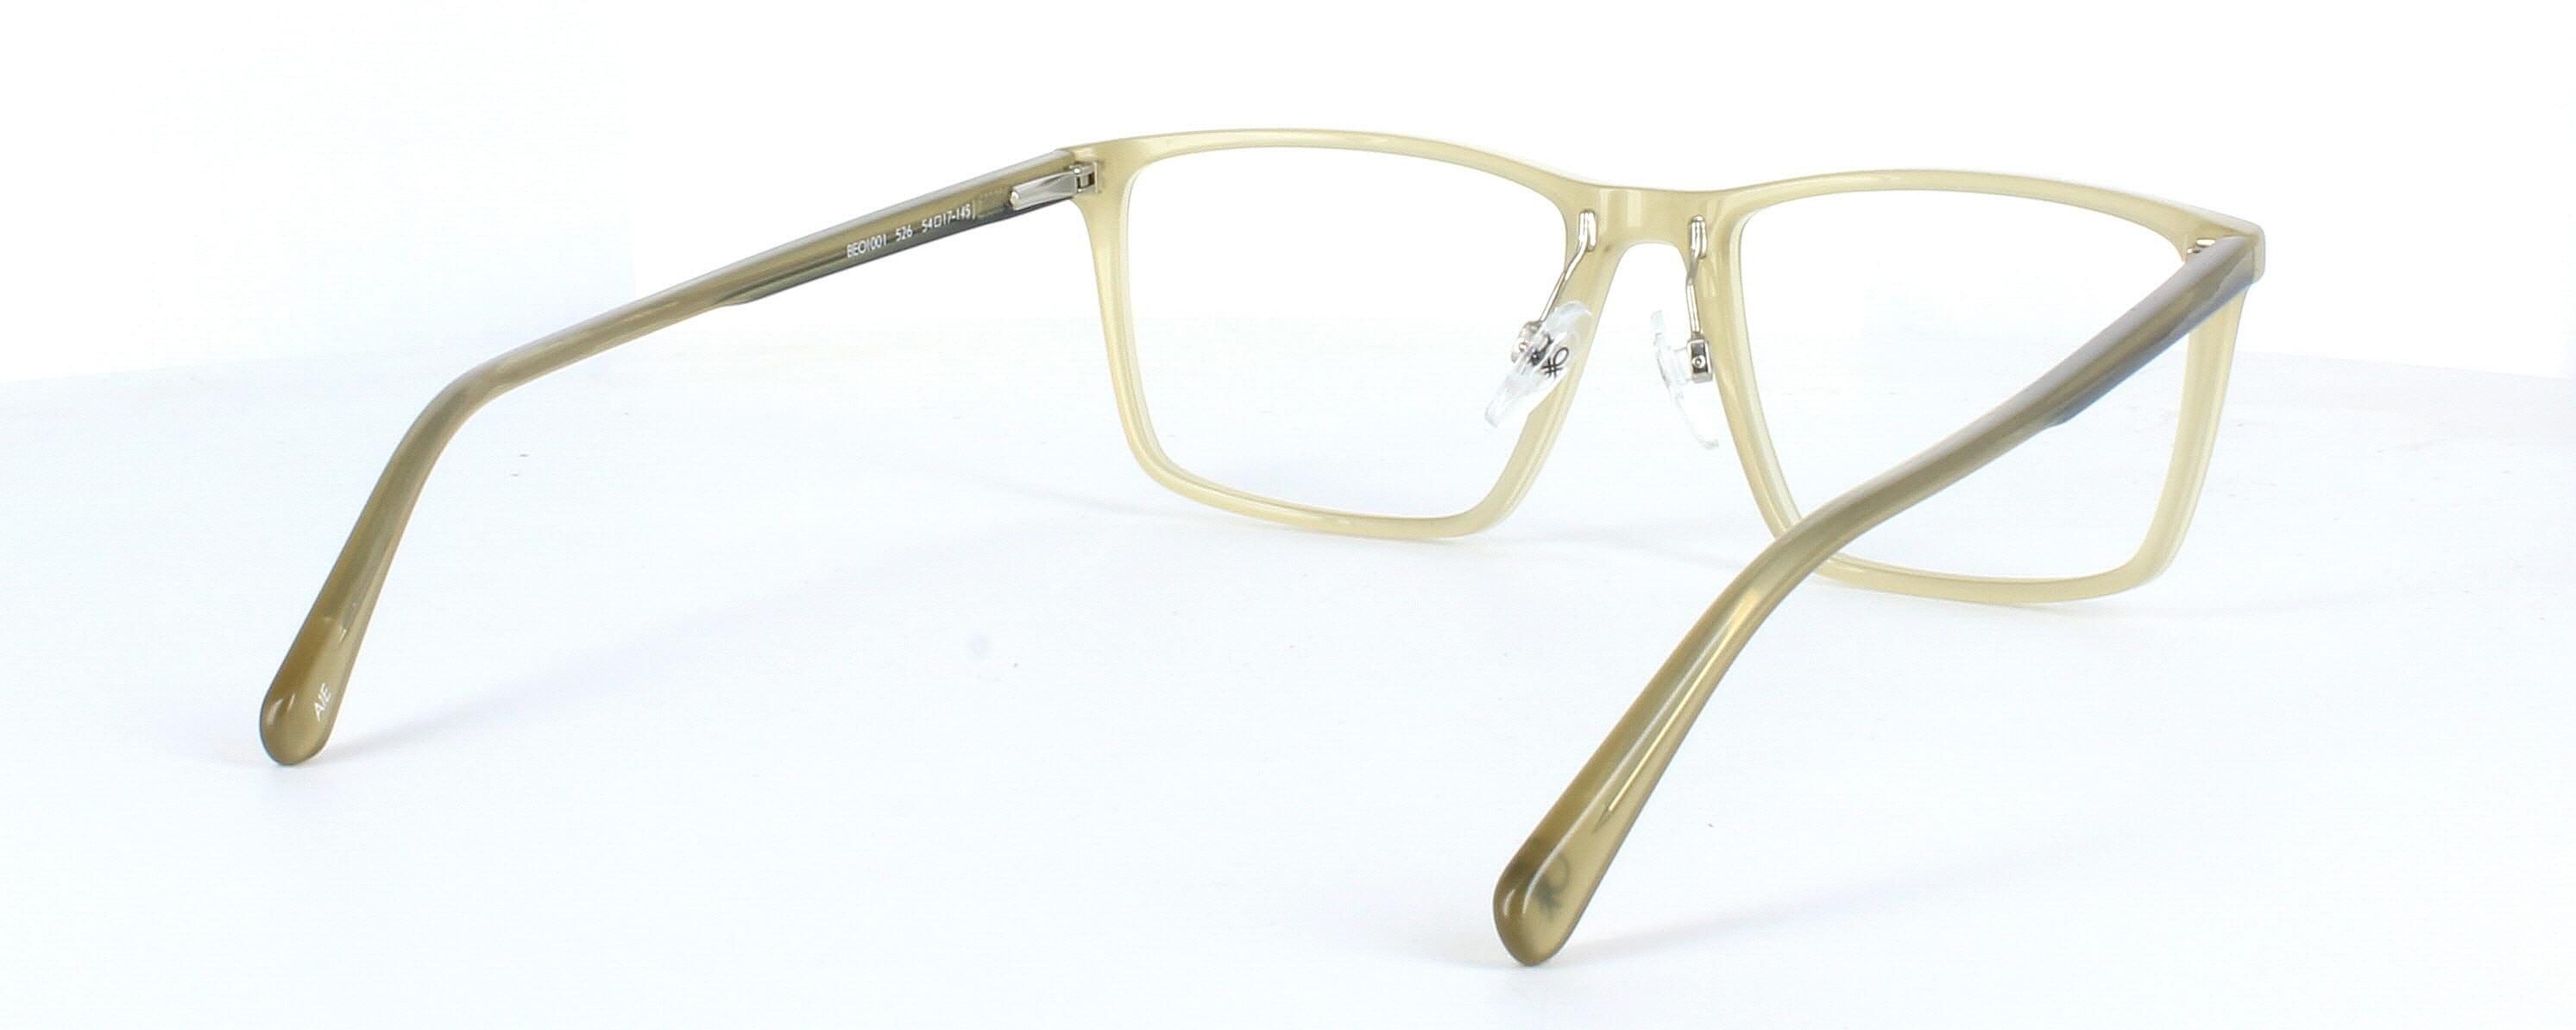 Benetton BE1O001 526 - Gents designer hand made acetate frame with crystal beige face and matching sprung hinge arms - image view 4